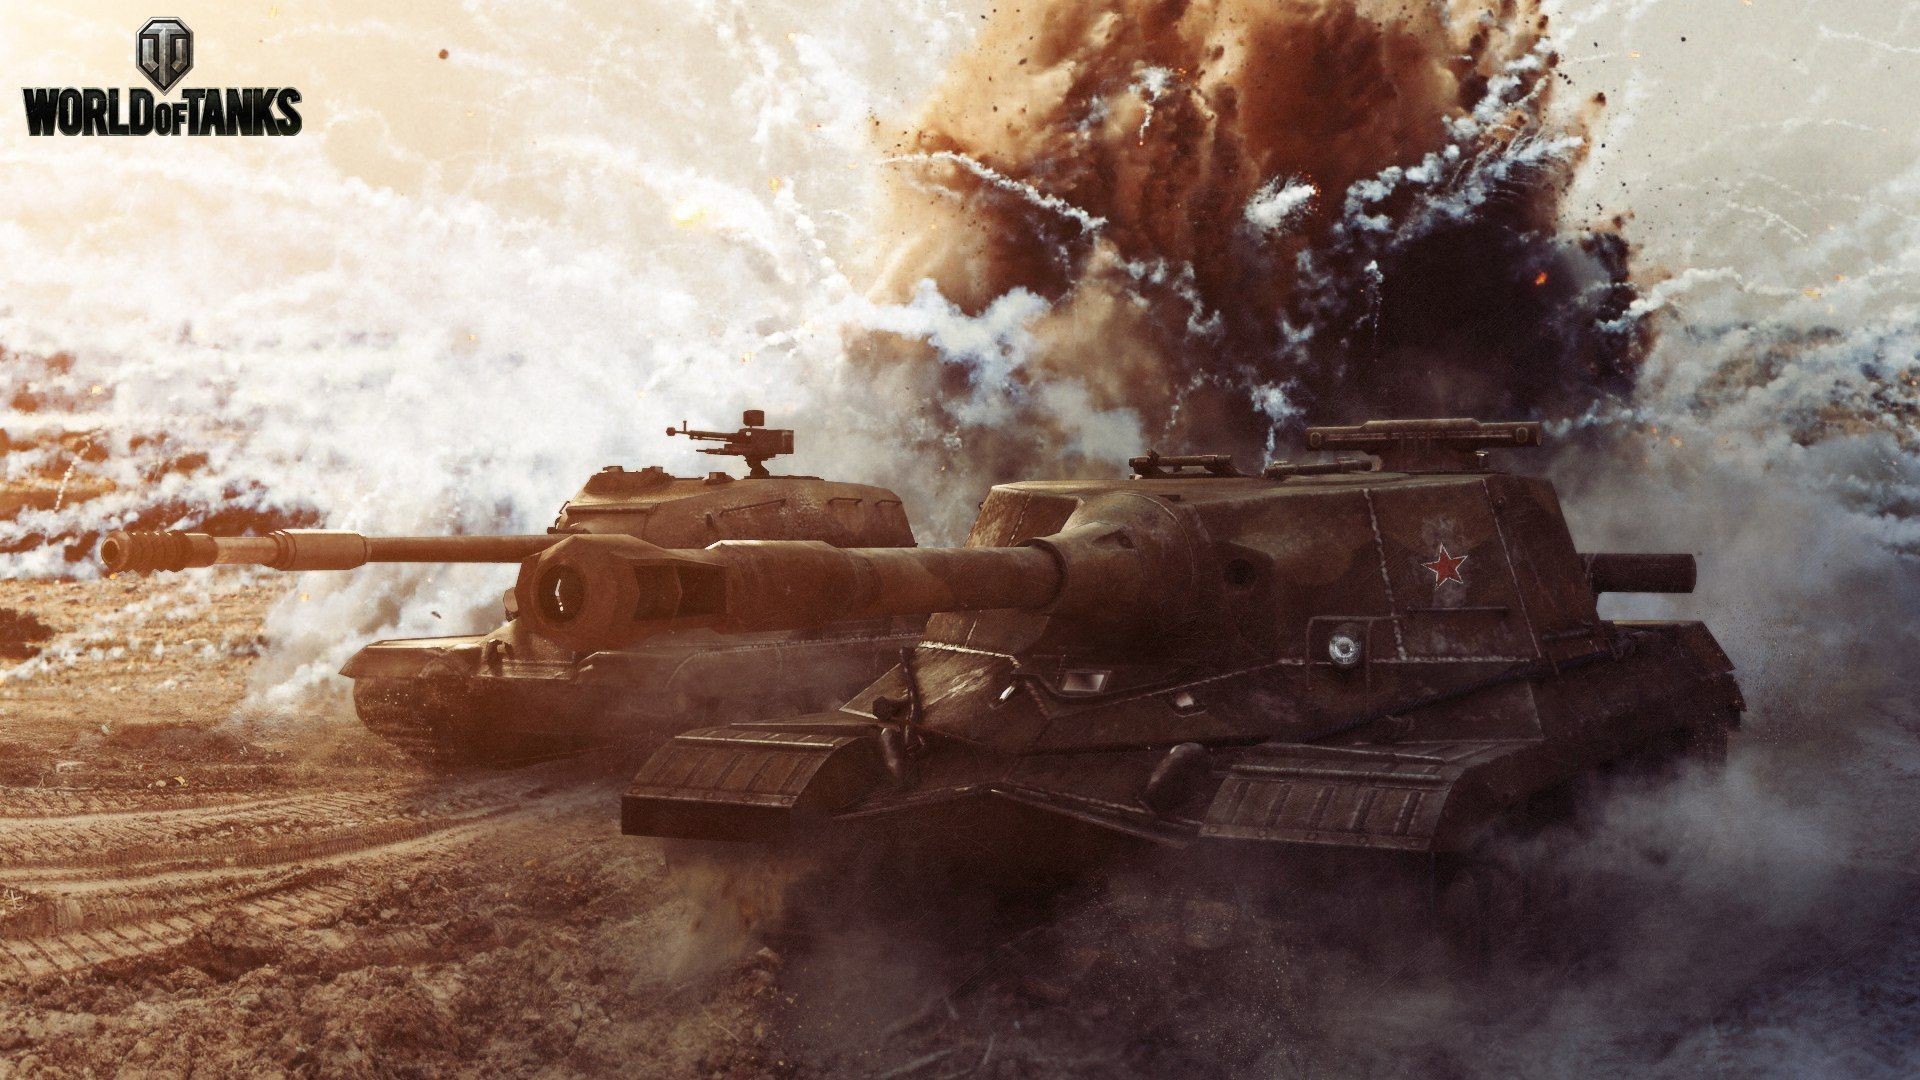 1920x1080 World of Tanks: russian tank under fire wallpapers and images .